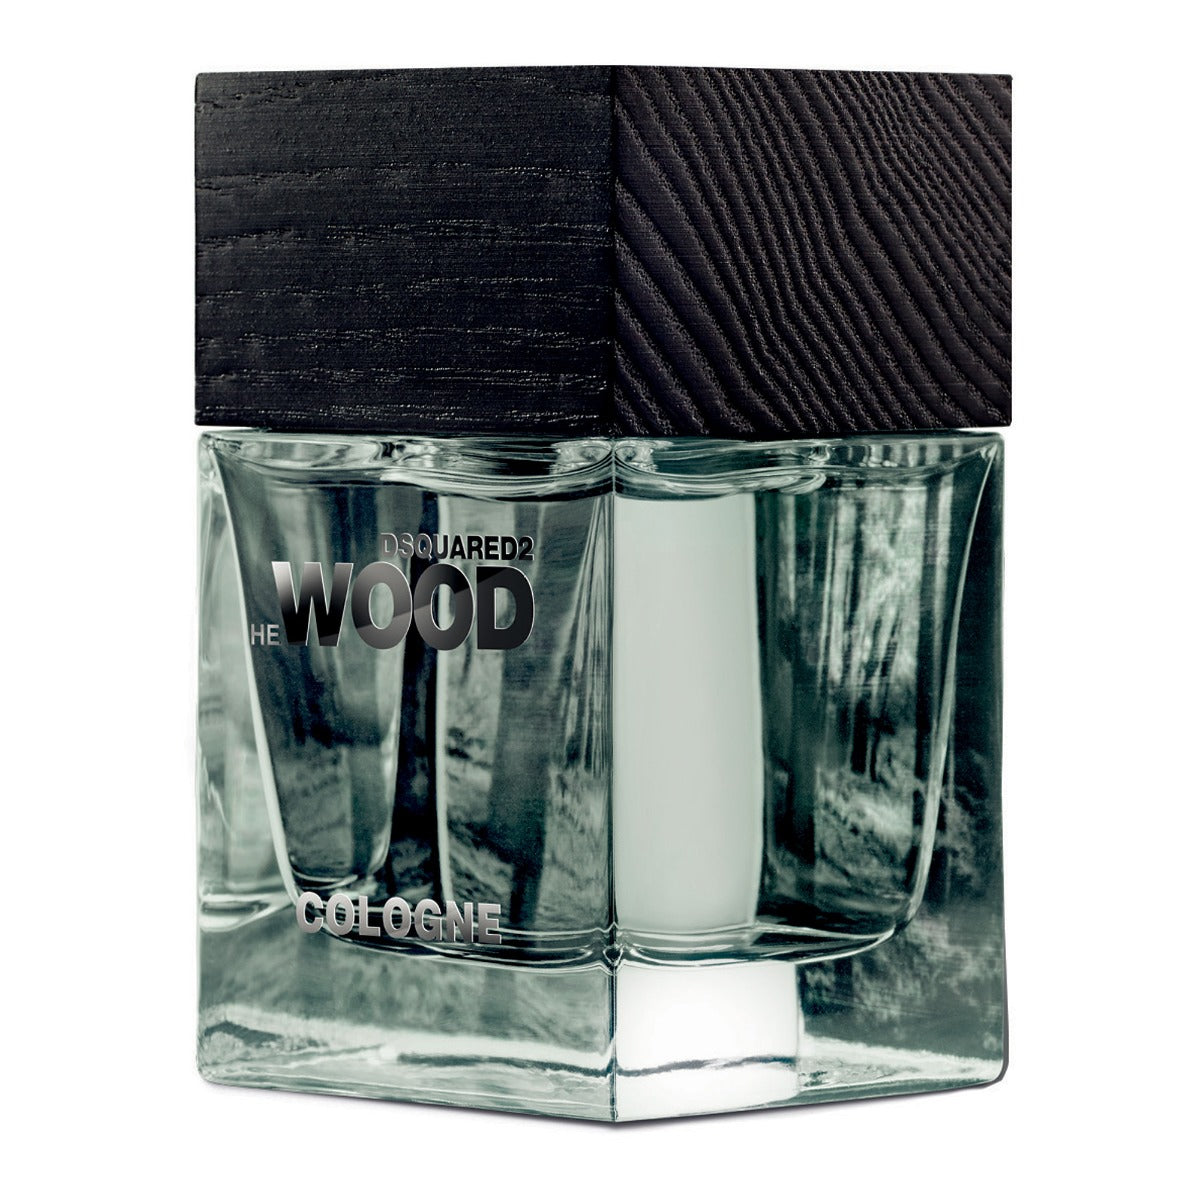 DSQUARED² HE WOOD COLOGNE POUR HOMME FOR MEN EDC 75 ml - samawa perfumes 